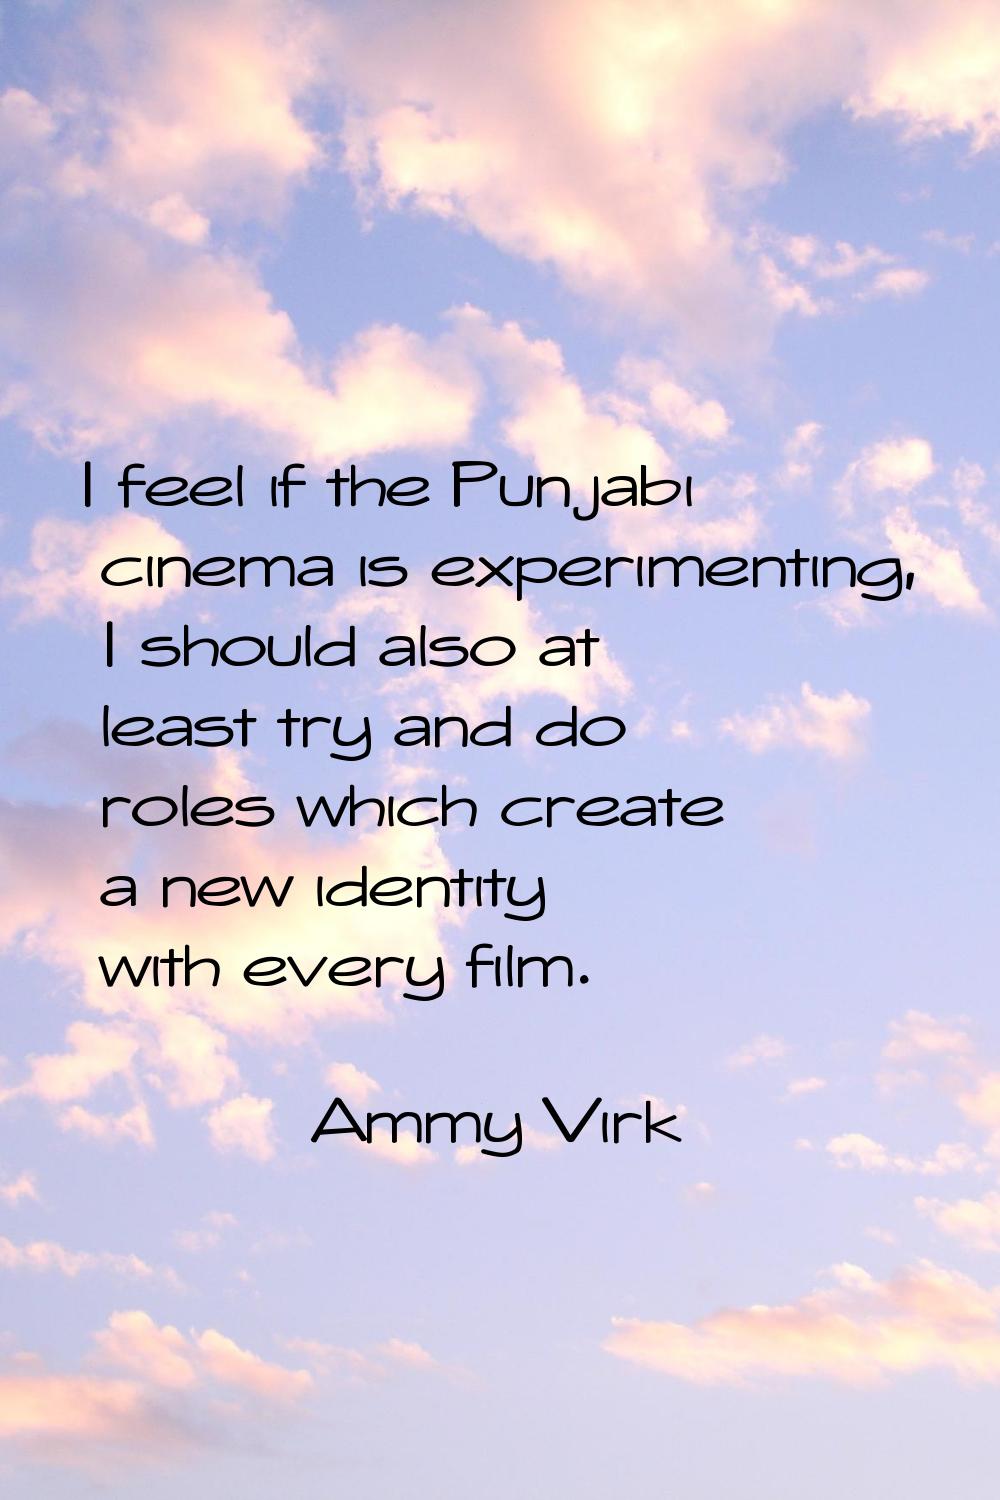 I feel if the Punjabi cinema is experimenting, I should also at least try and do roles which create